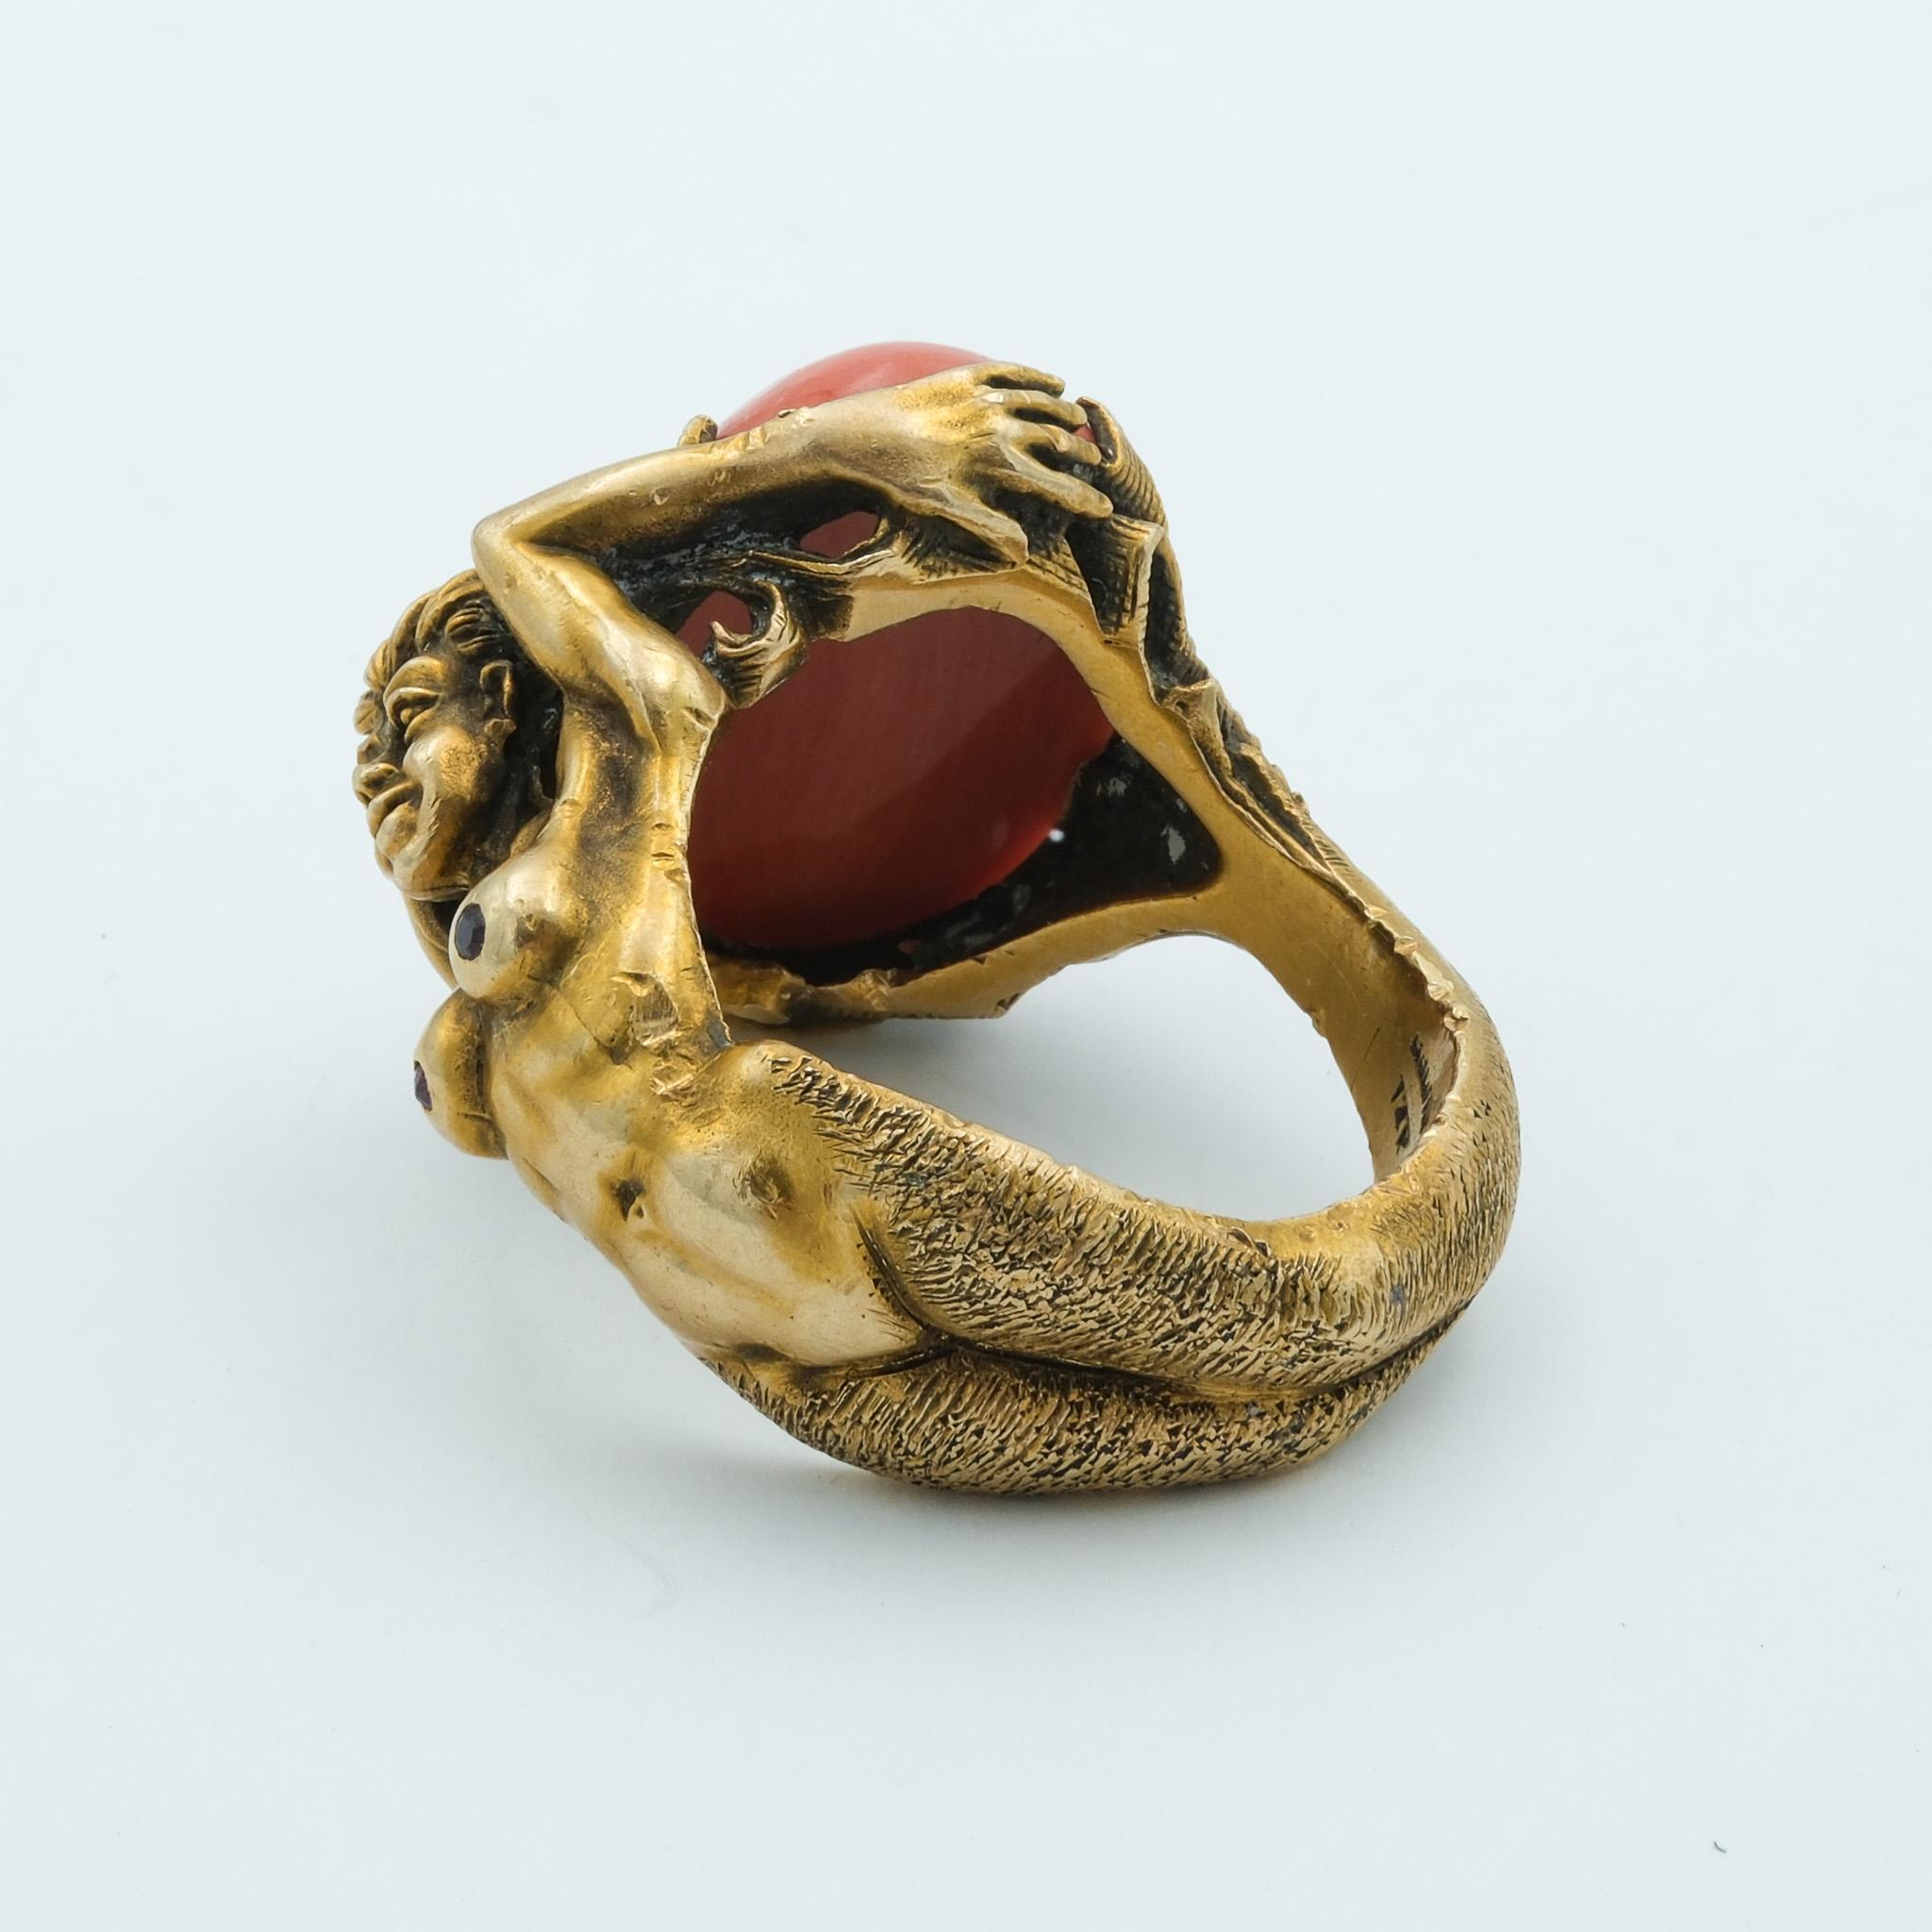 Figural Artisan Mermaid Lady Ring with 12.8 carat Coral and Garnet Handmade In Good Condition For Sale In Fairfield, CT